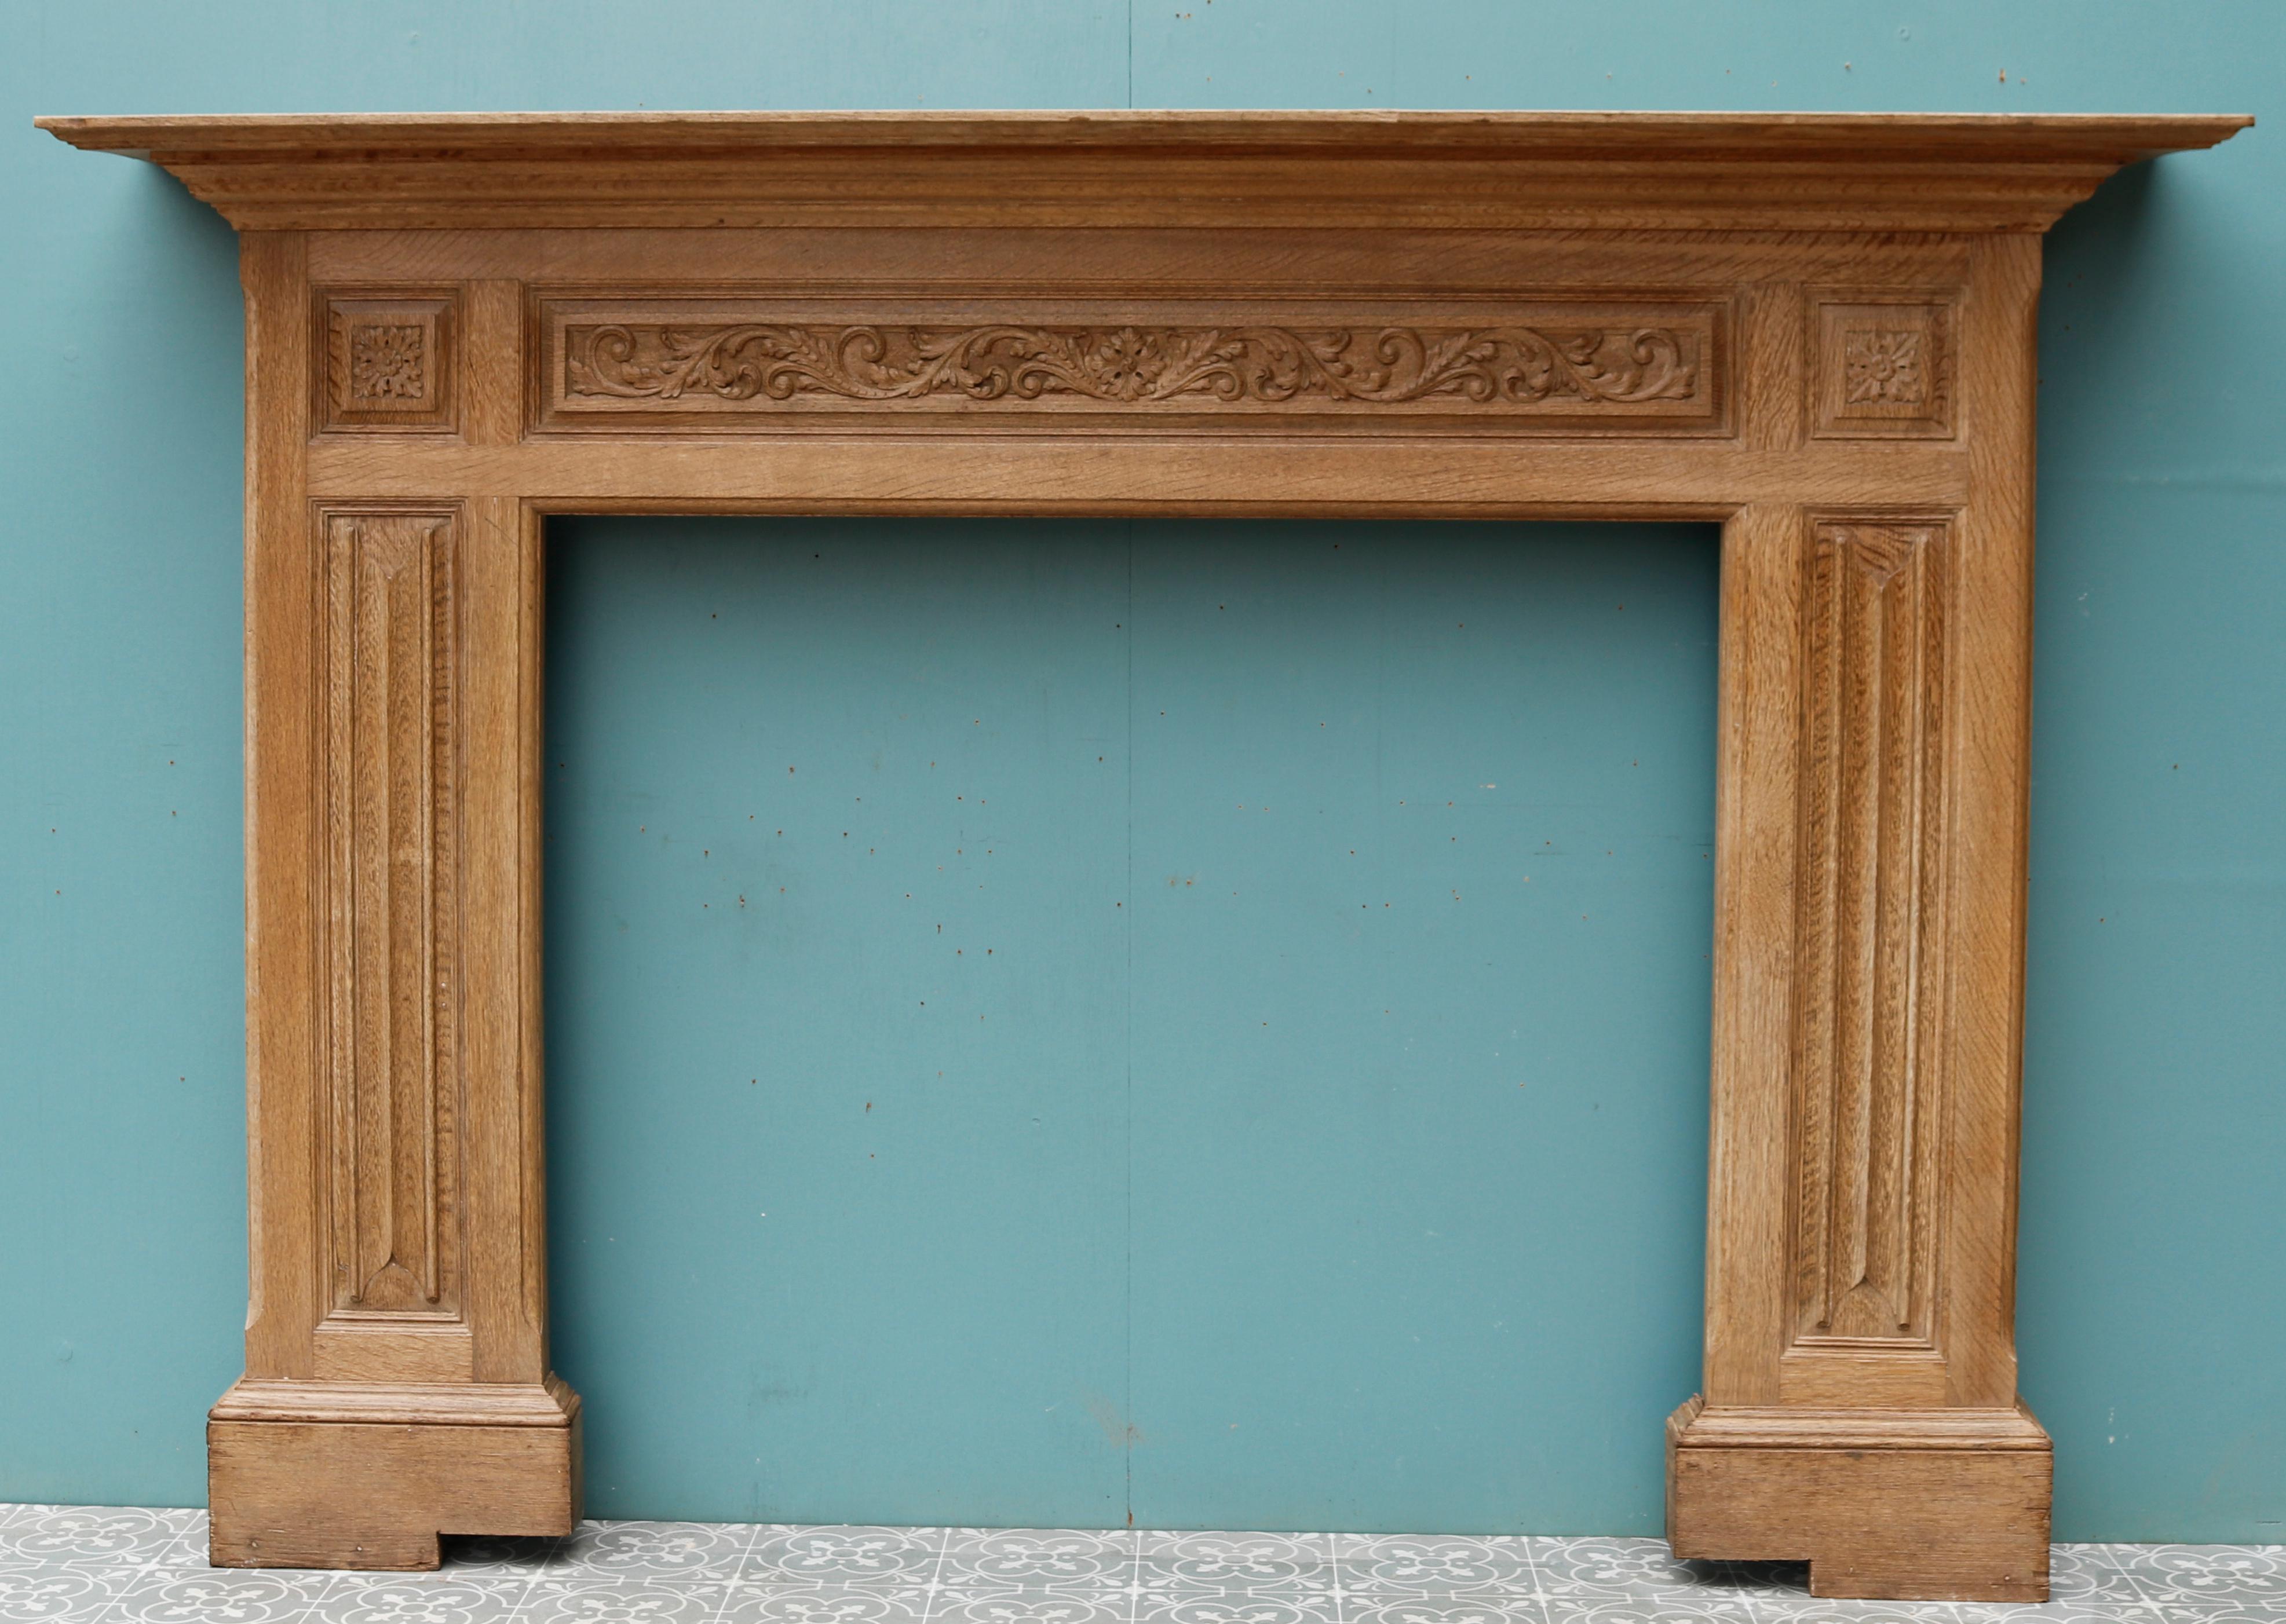 A large English carved oak fireplace. The frieze panel carved with foliage, paterae end blocks and carved linen fold jambs.

Additional dimensions:

Opening height 106 cm

Opening width 118 cm

Width between outsides of the foot blocks 184